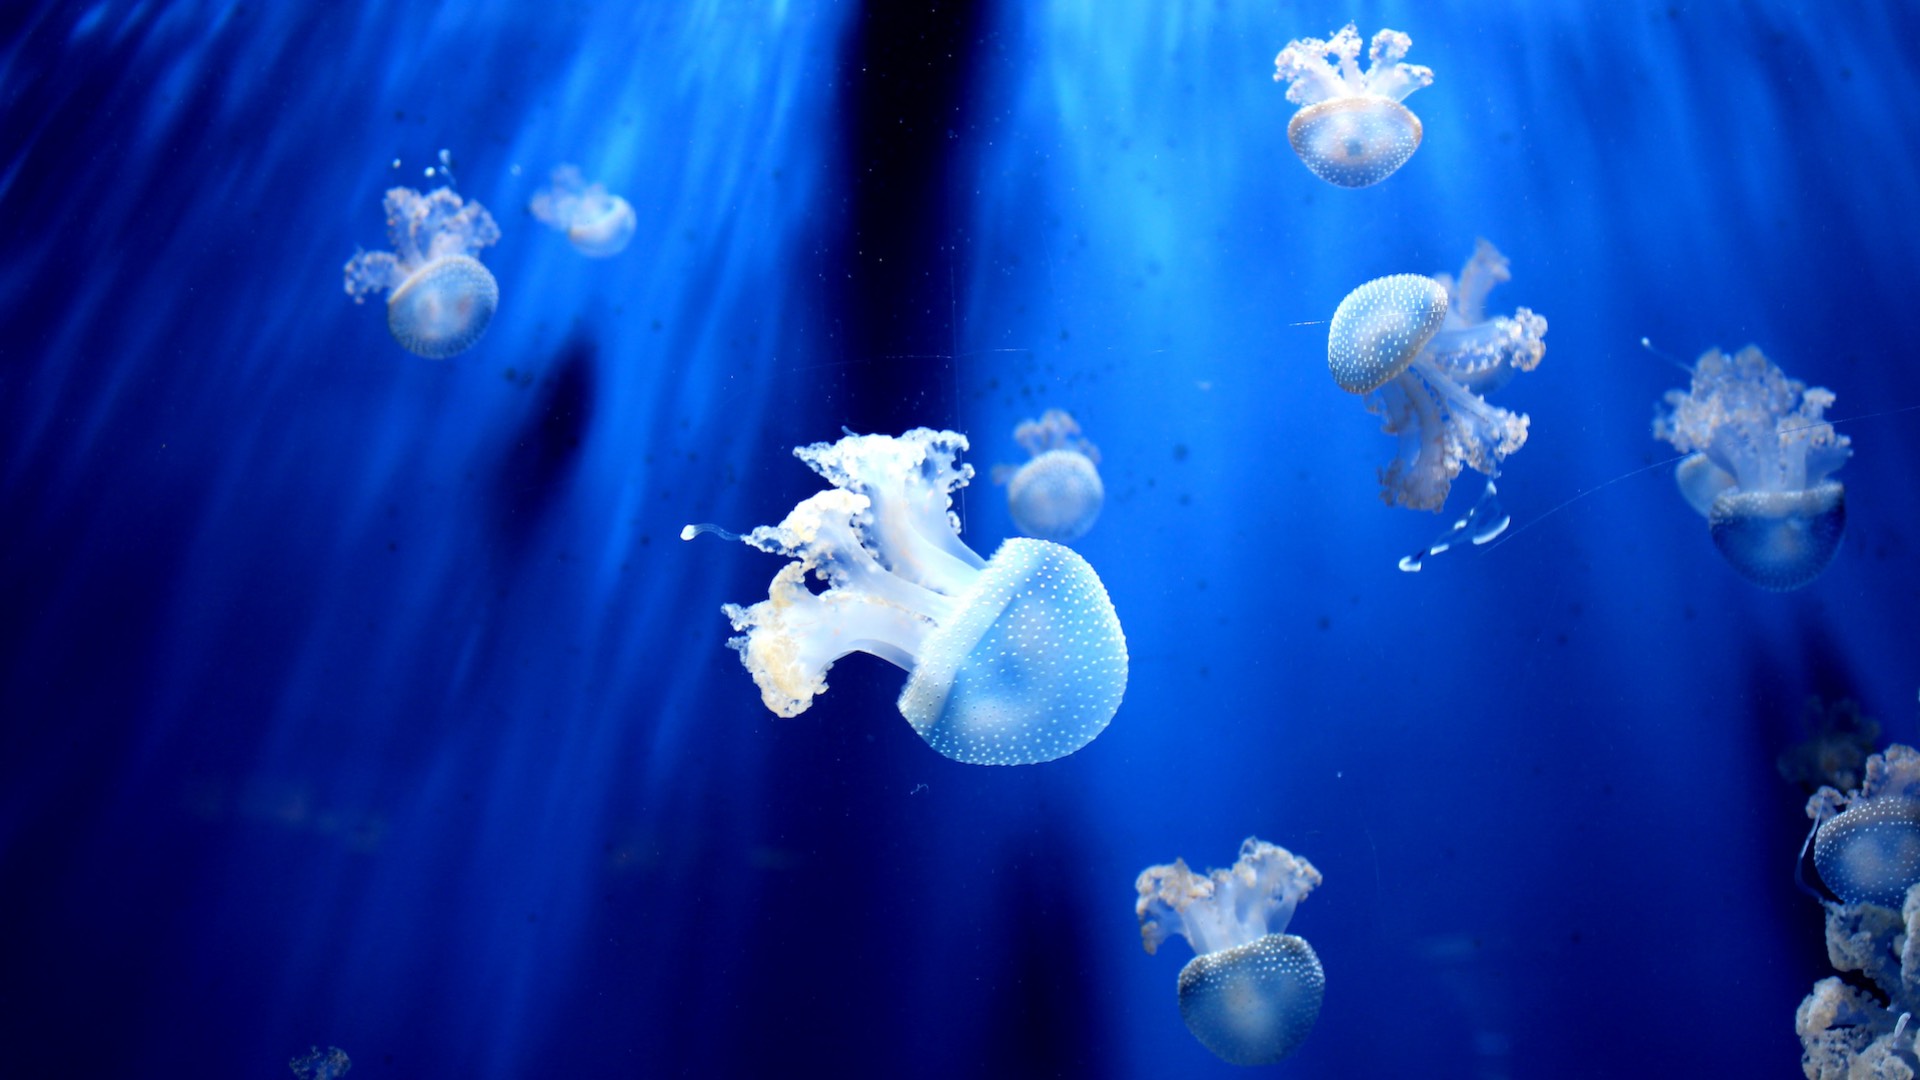 A Group Of Jellyfish Swimming In The Ocean Zoom Backgrounds Template